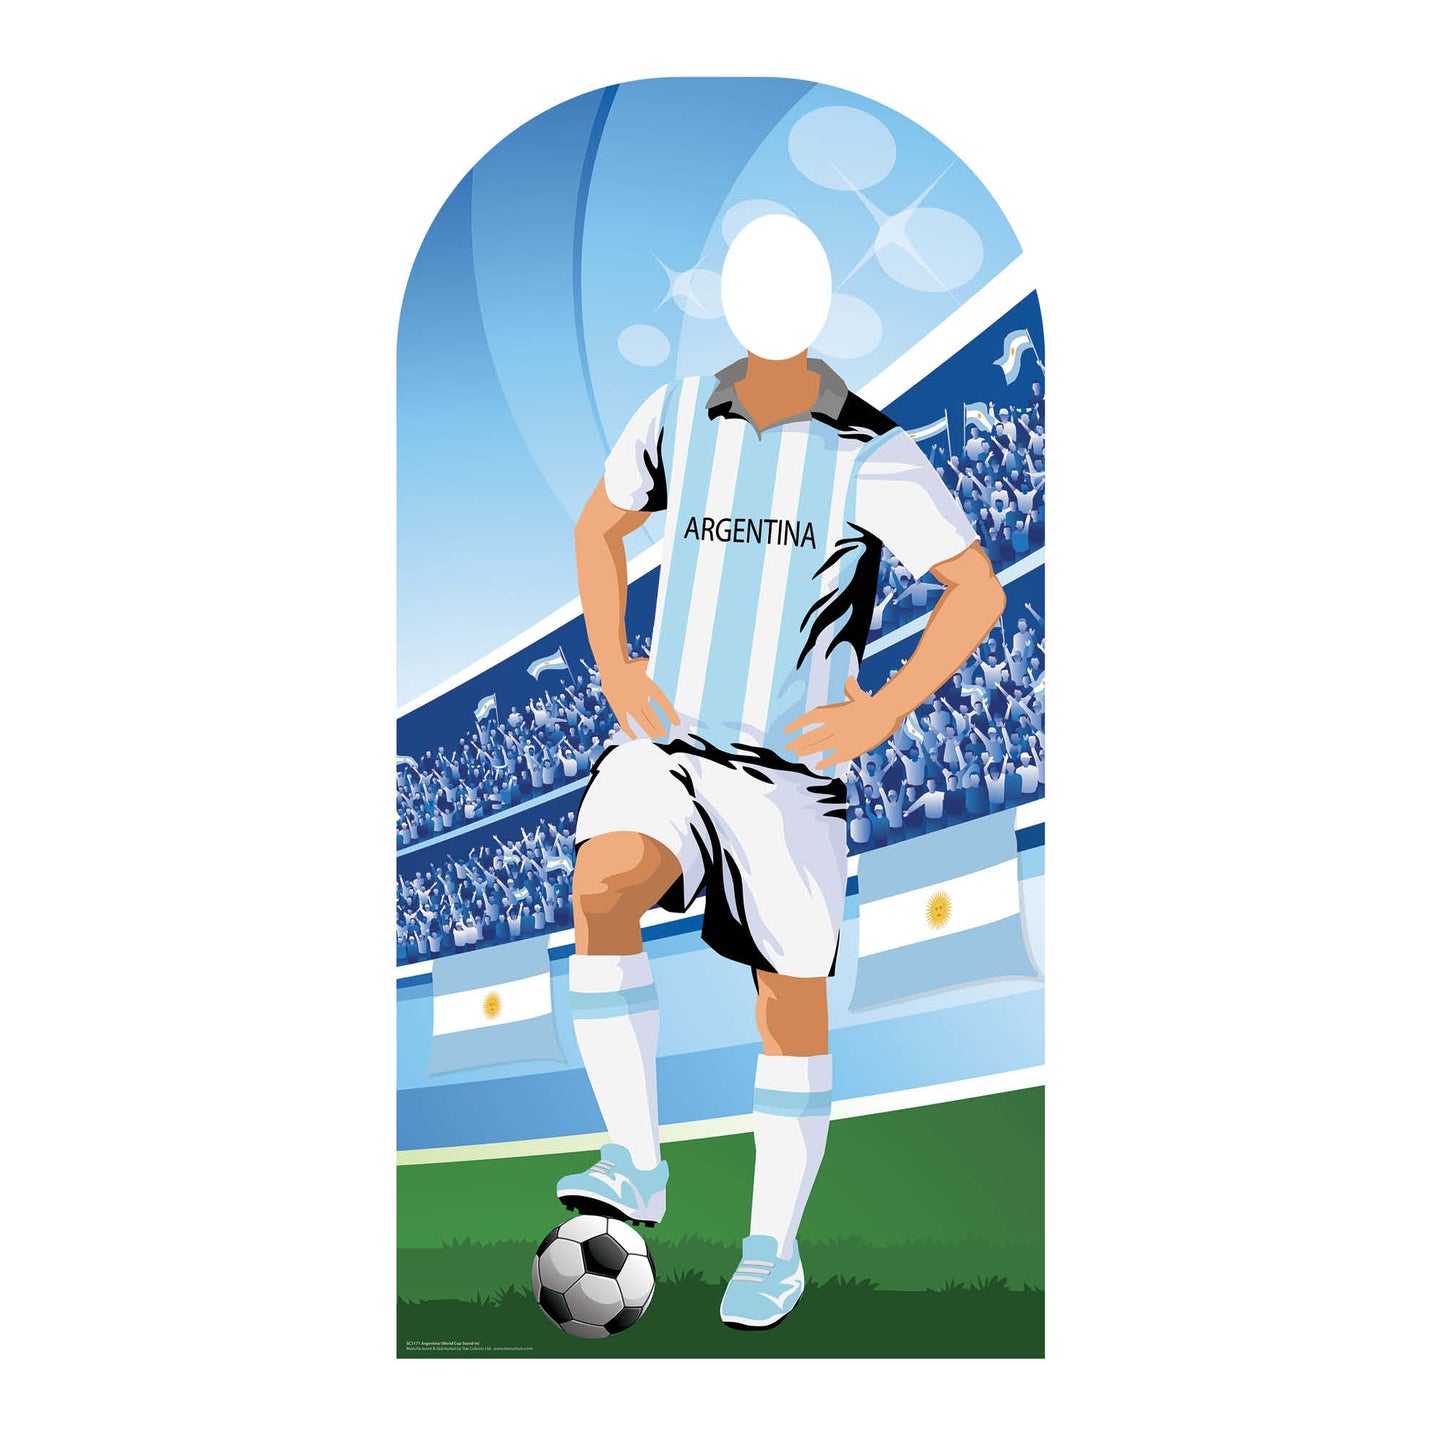 World Tournament Football Argentina  Stand-IN Cardboard Cutout